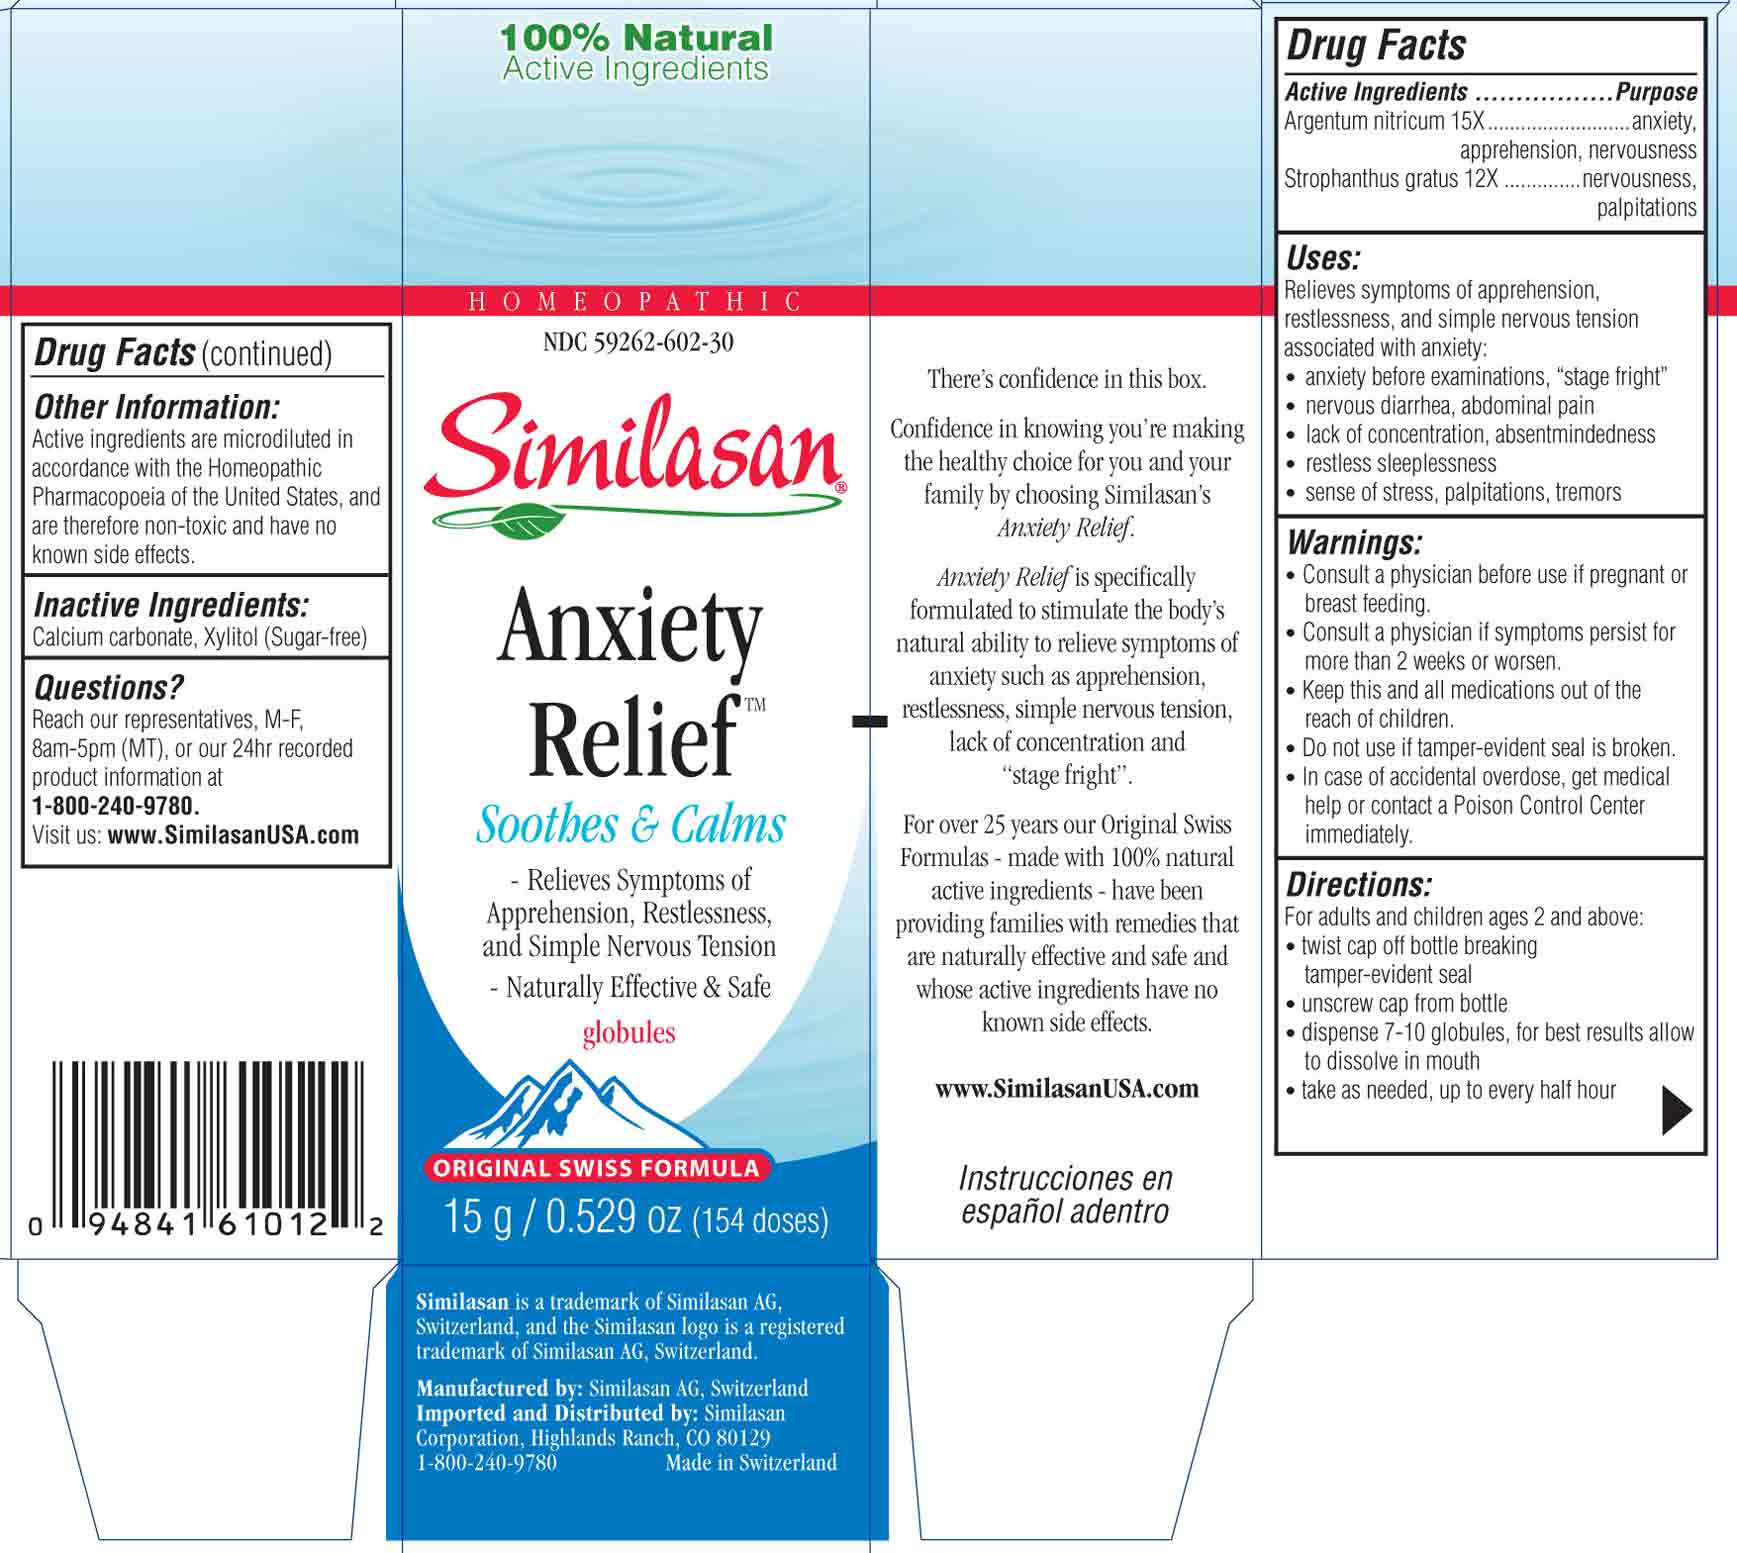 Anxiety Relief box